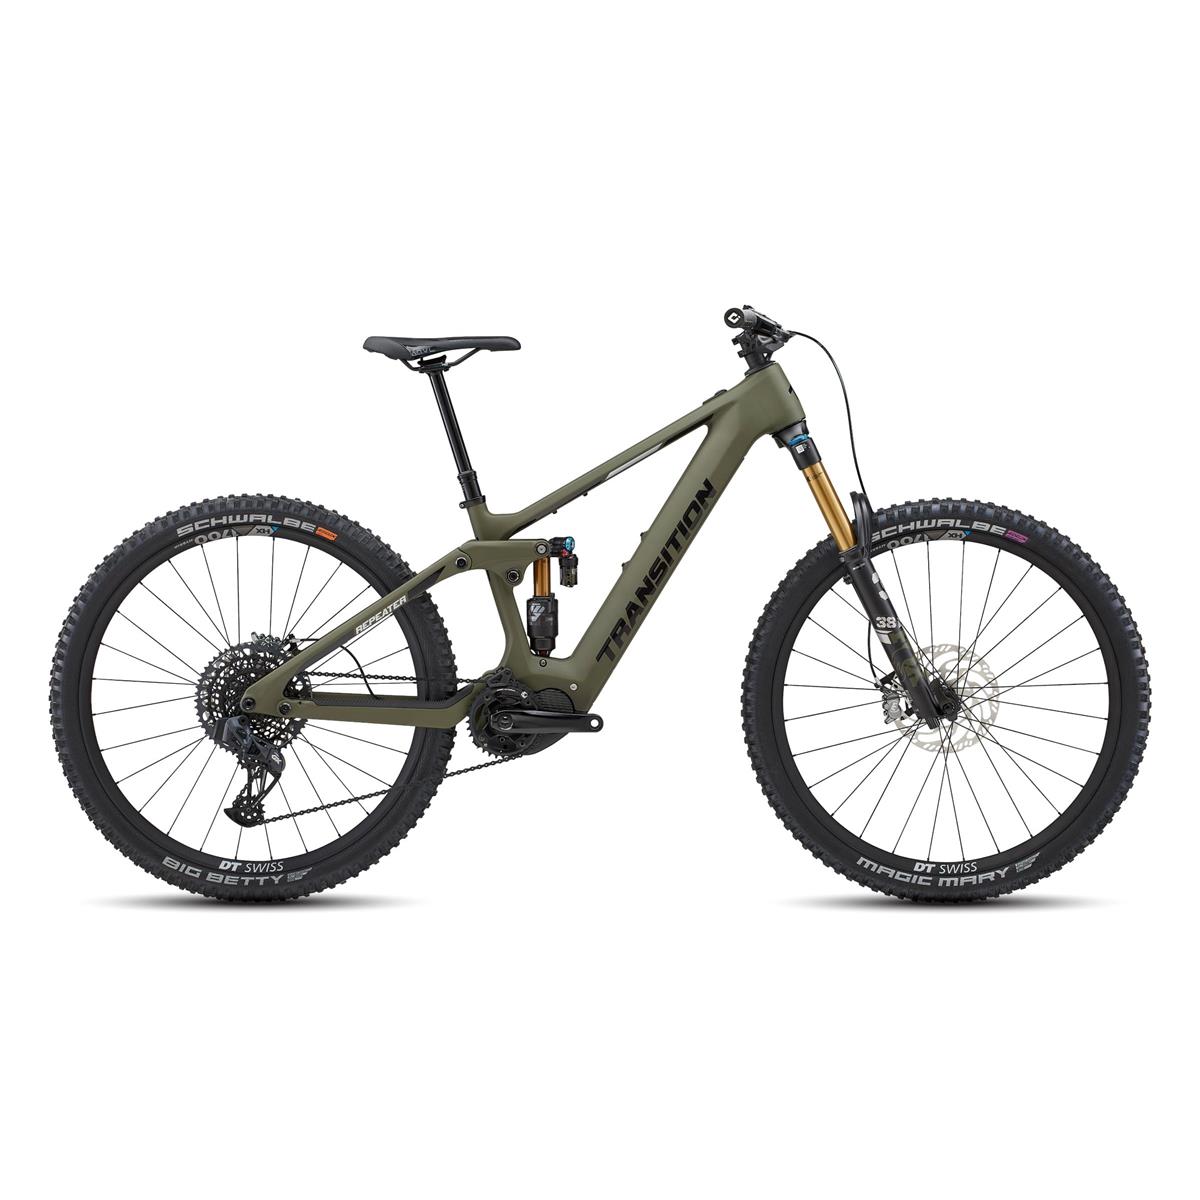 Repeater Carbon AXS 29'' 160mm 12s 630Wh Shimano EP8 Mossy Green Size S